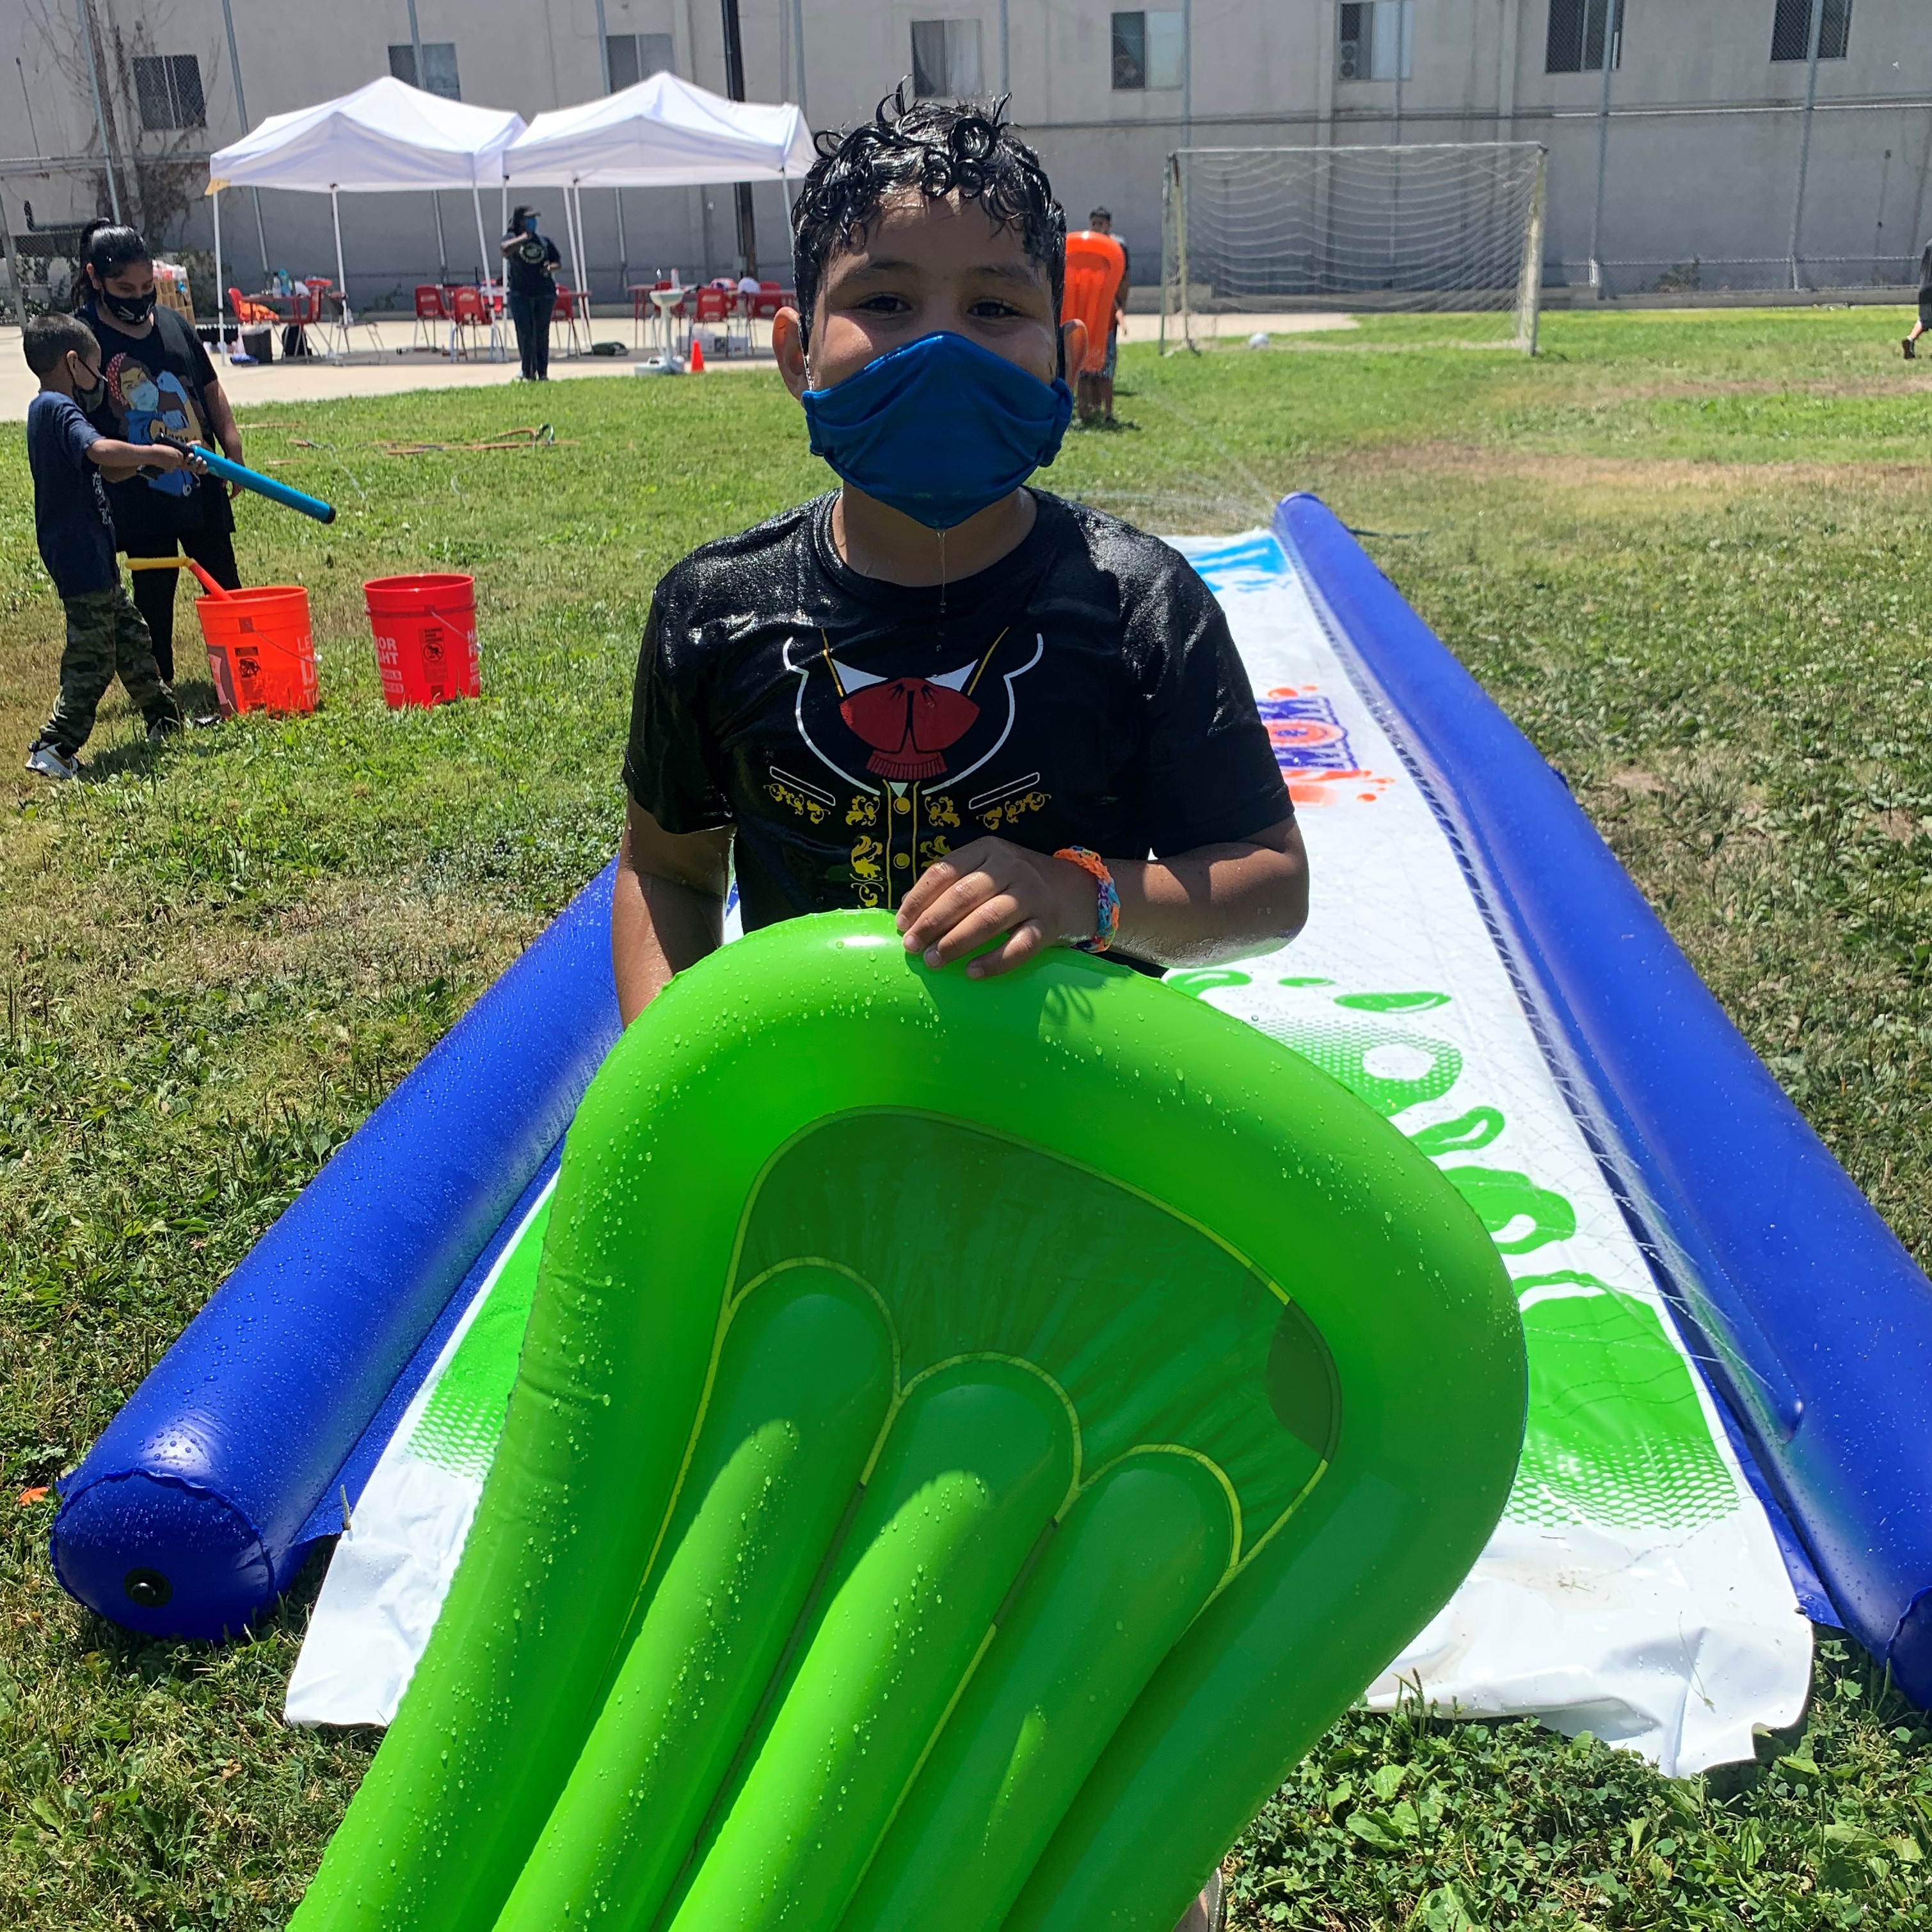 Young boy with air mattress at slip-n-slide